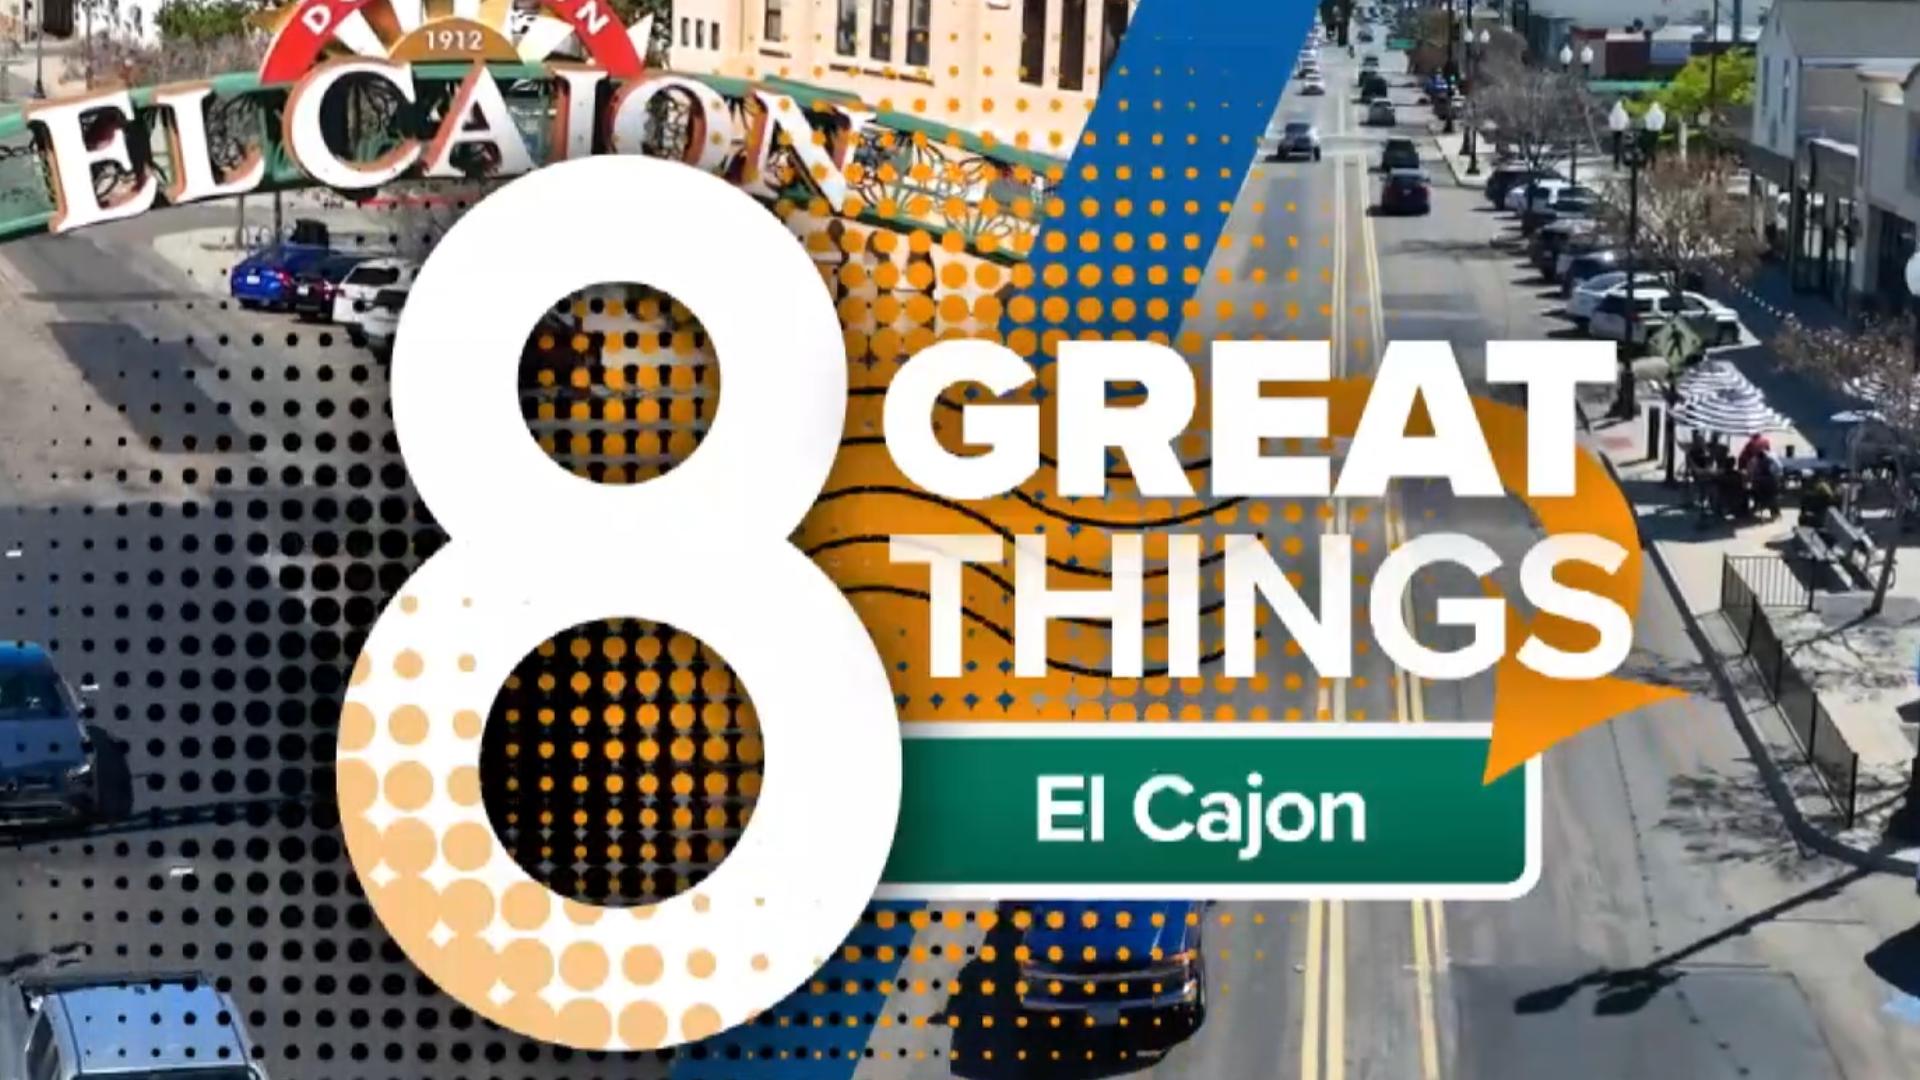 There are many diverse things to do and see in El Cajon, including several opportunities to get outside and enjoy nature.